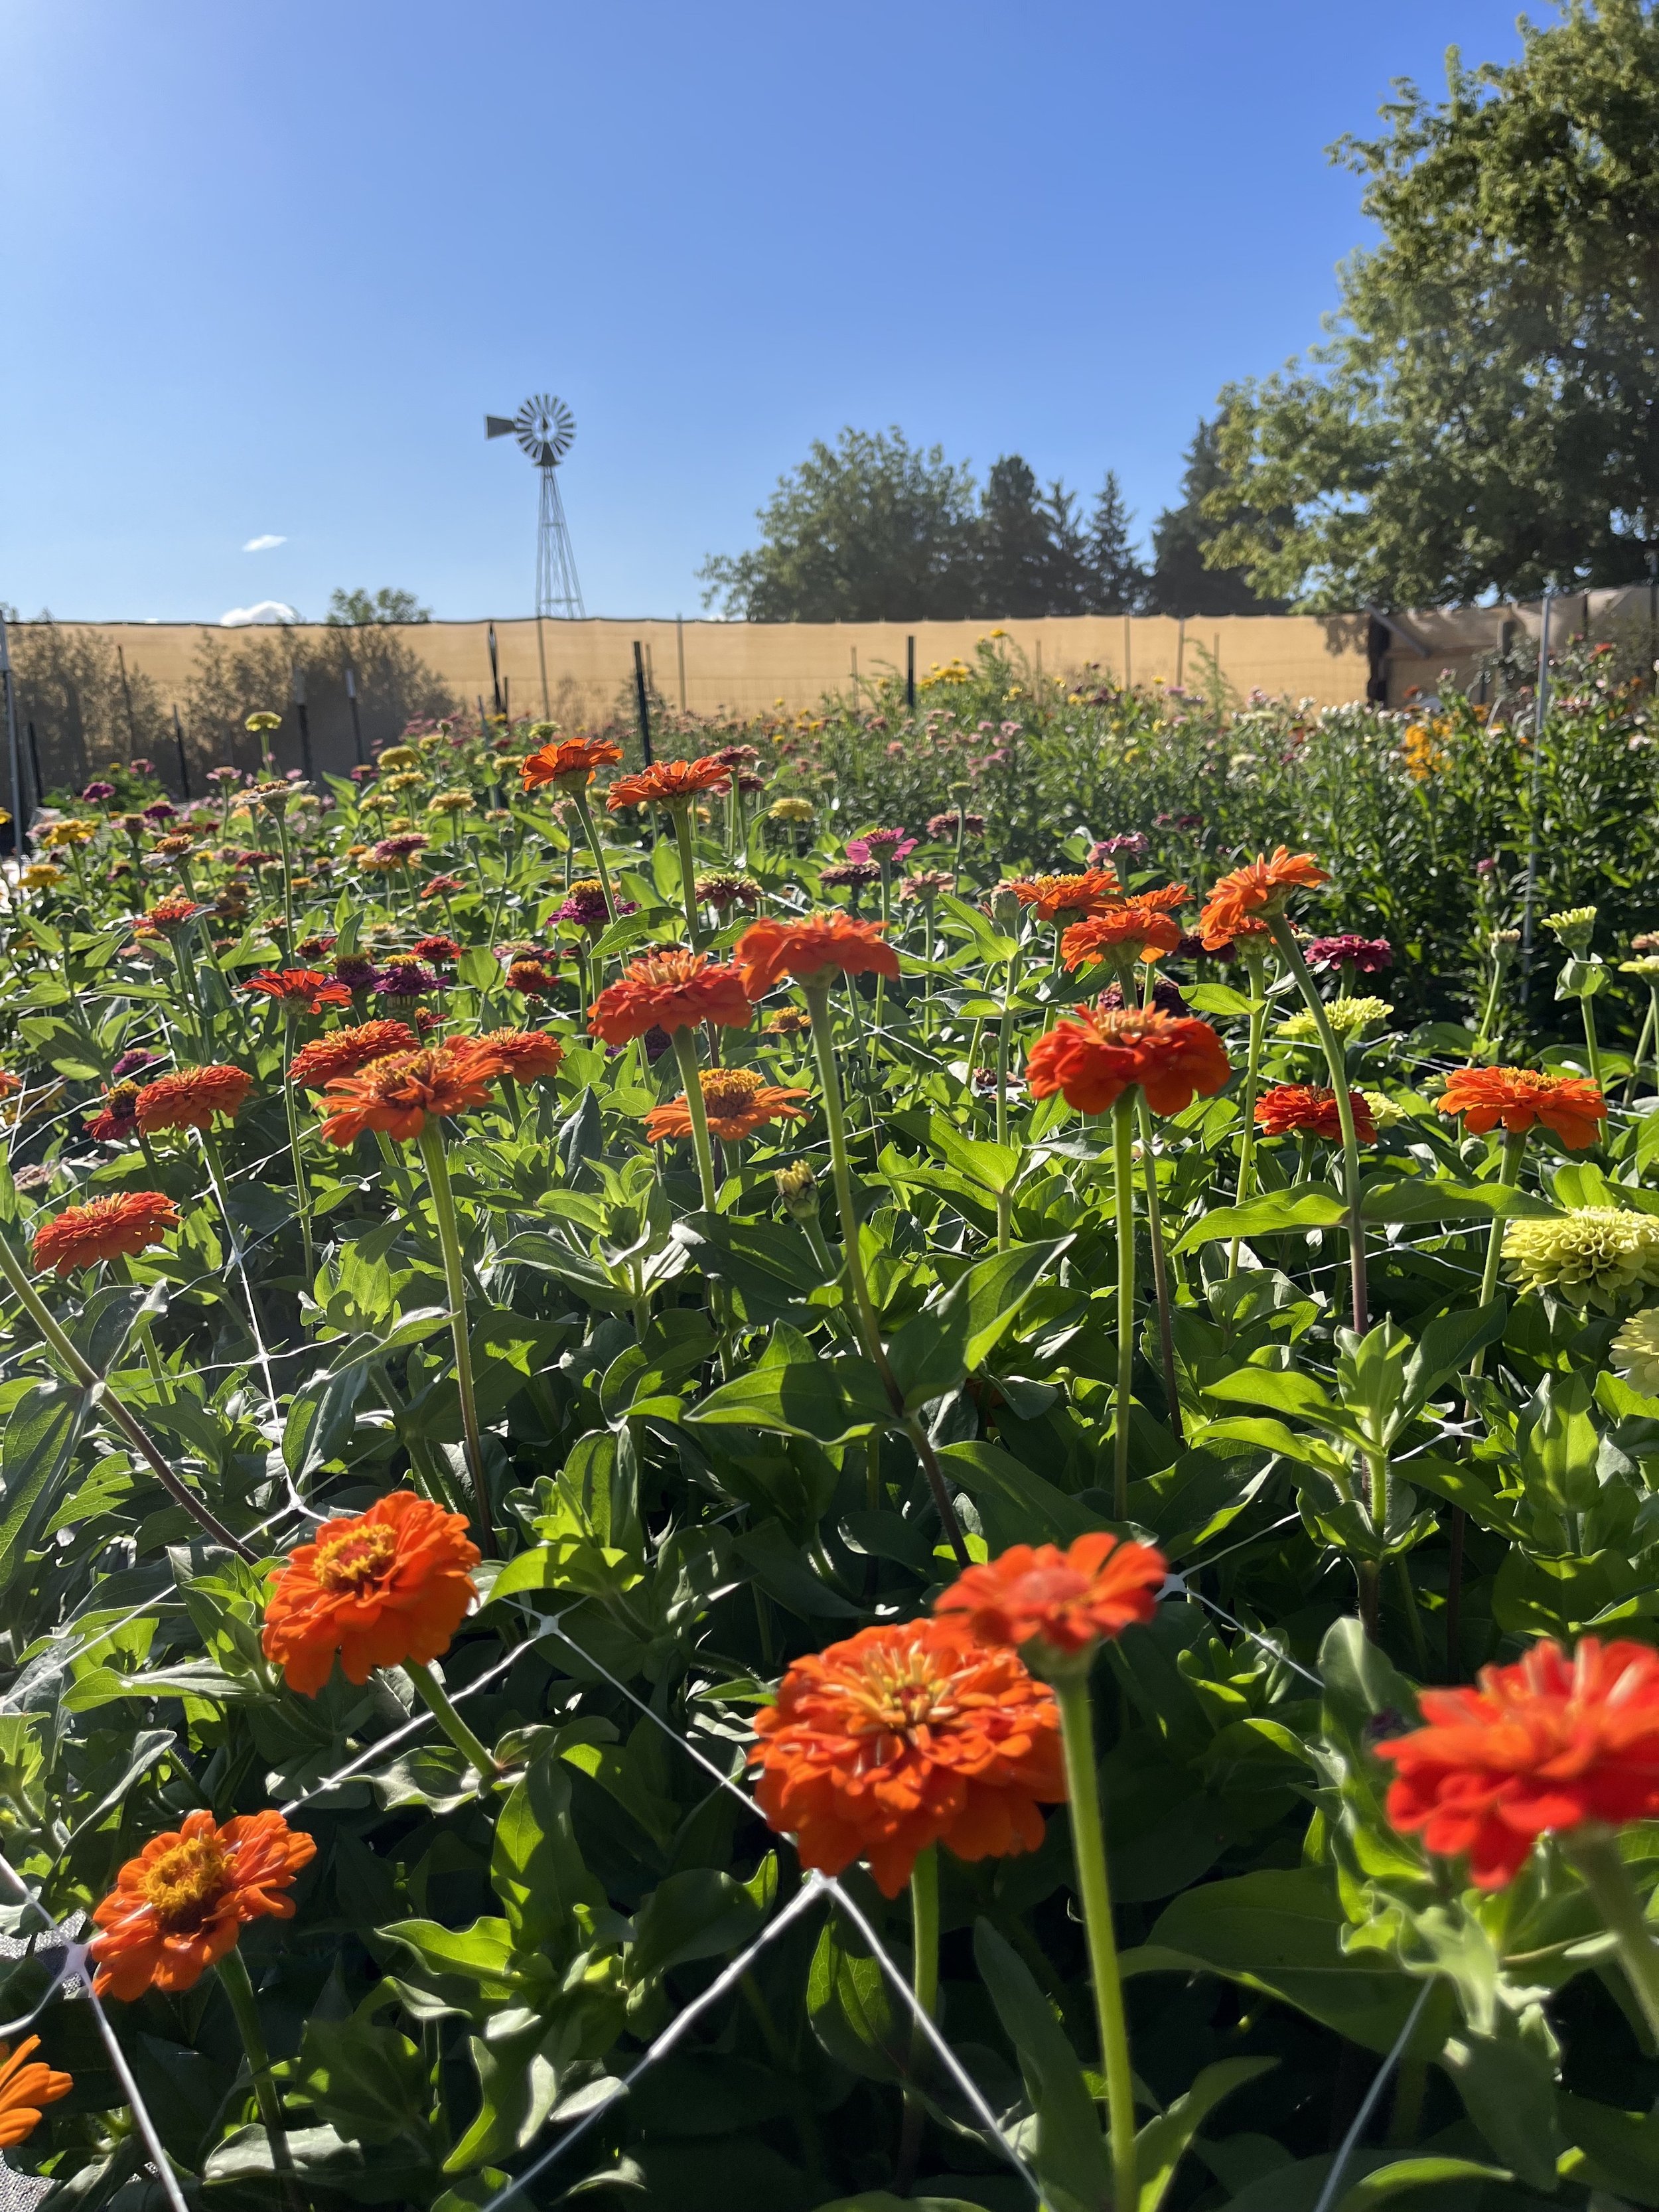 a row of orange zinnia flowers with a blue sky and a windmill